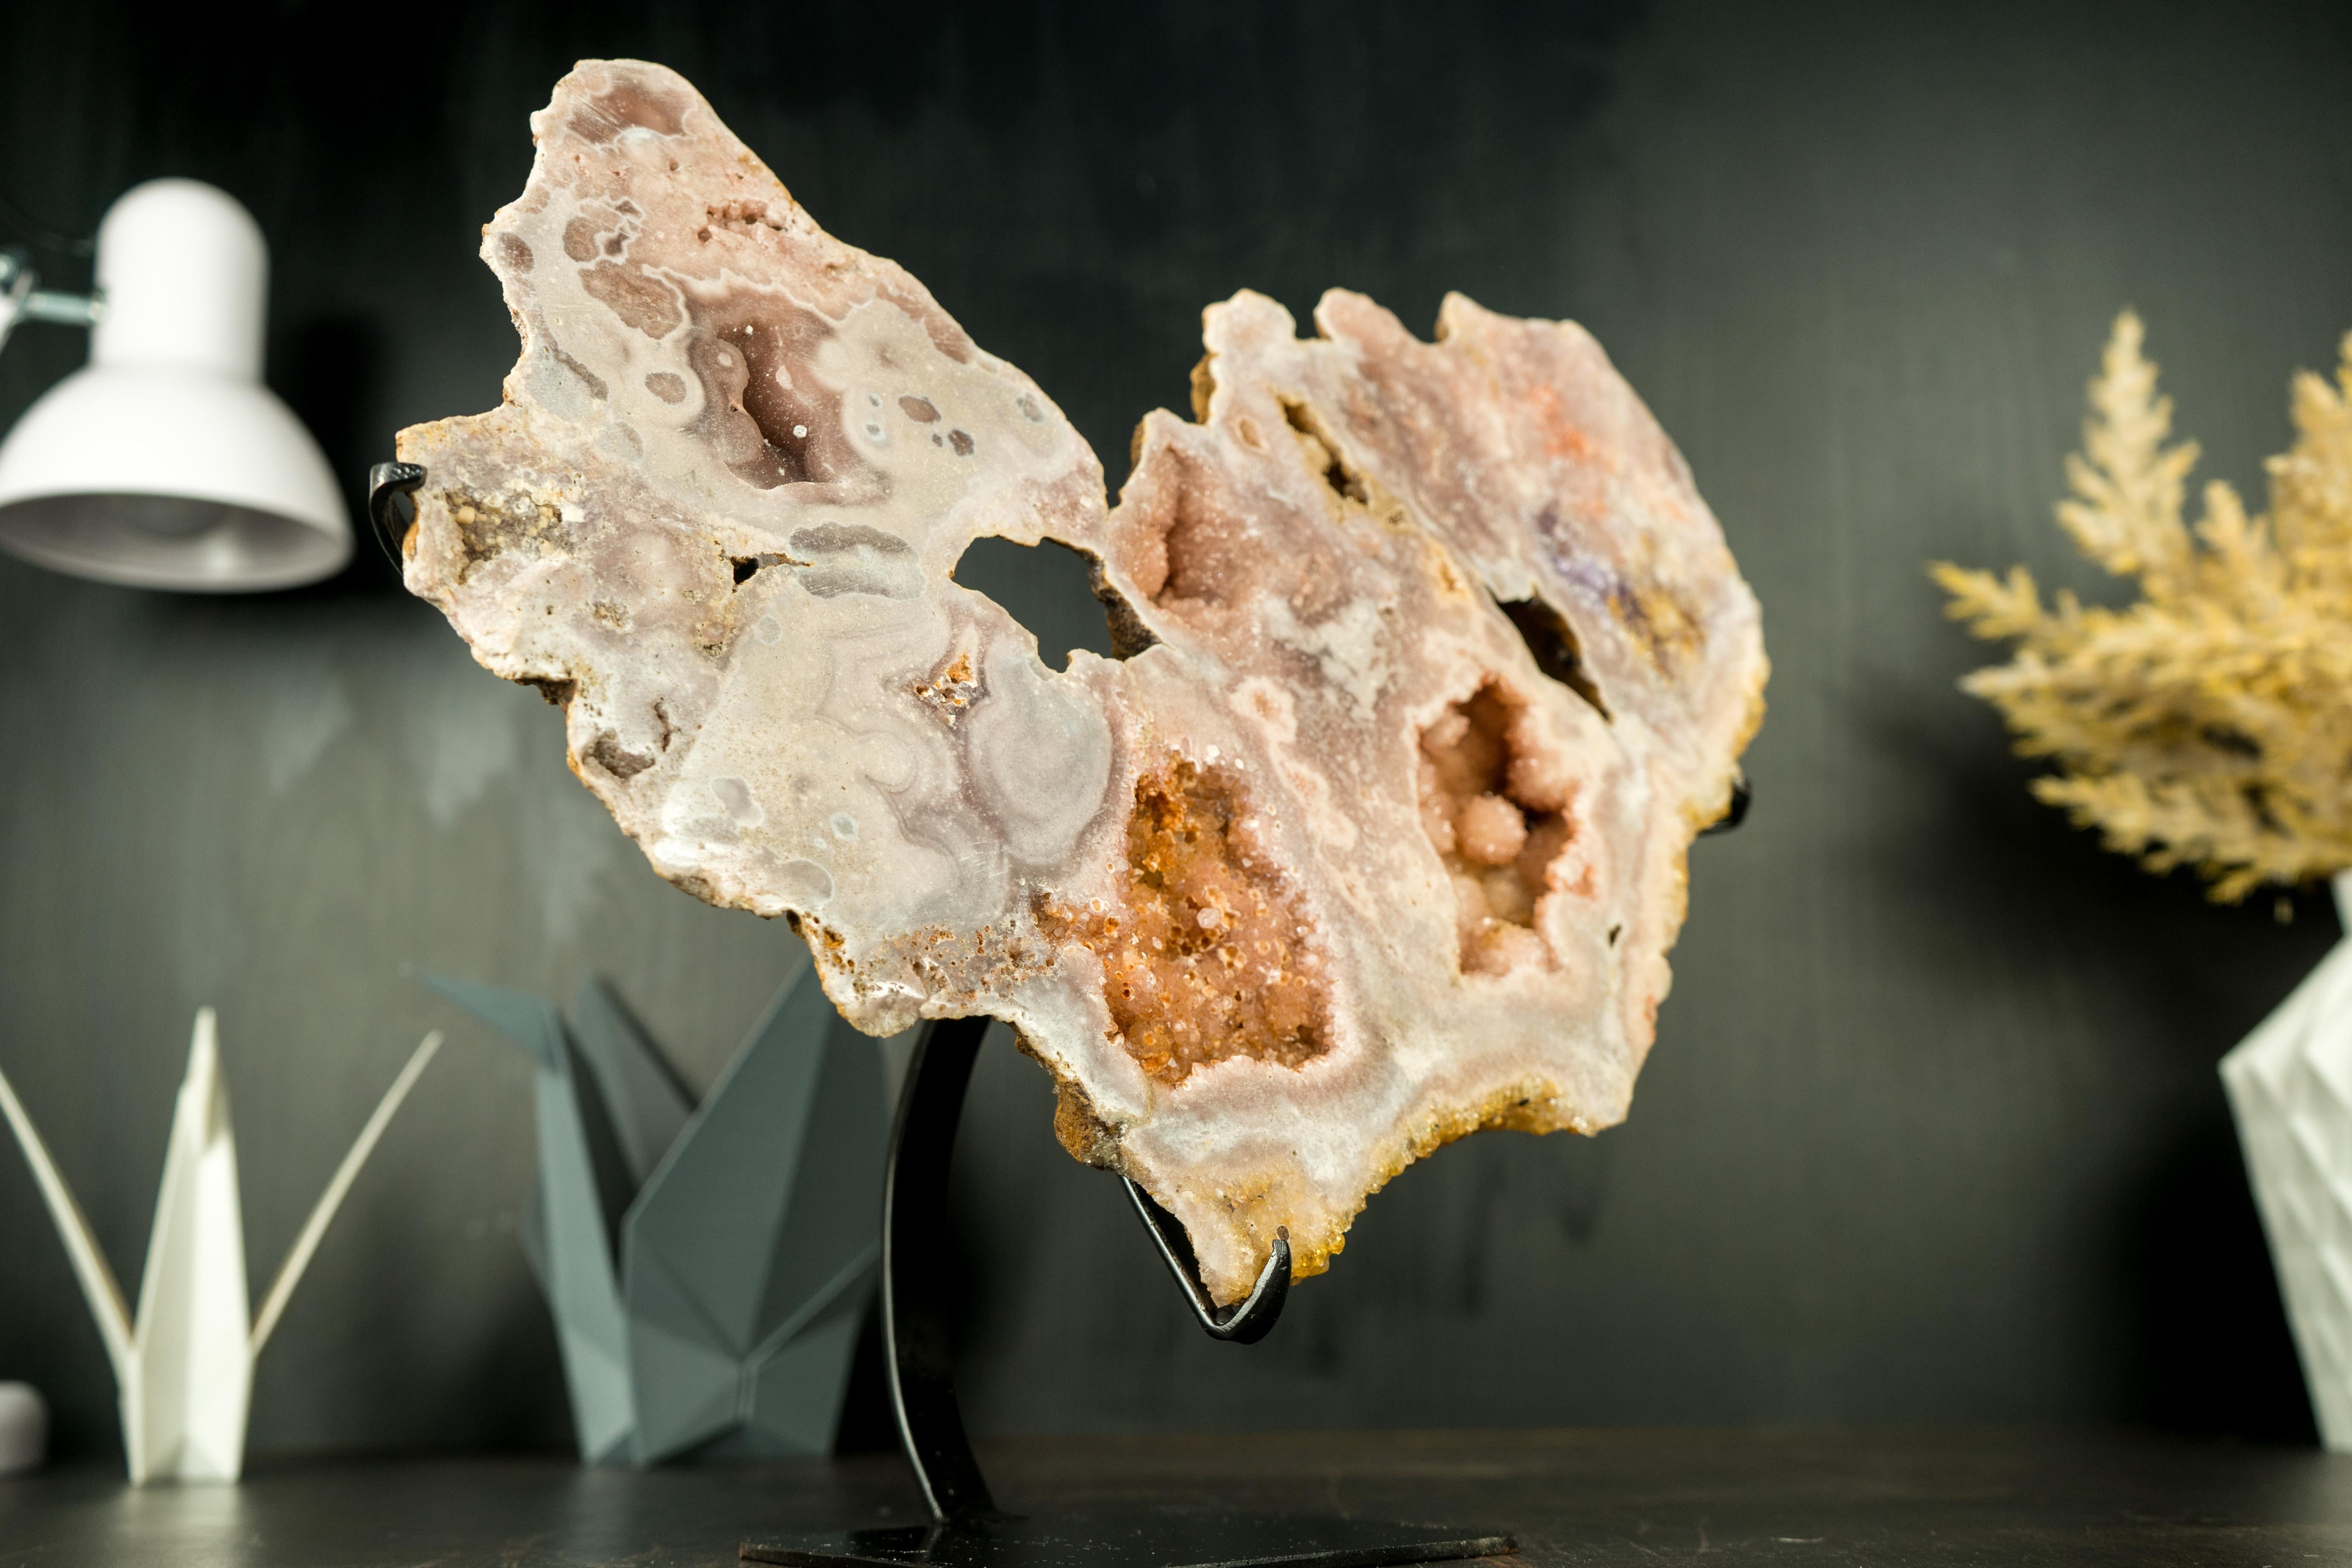 High-Grade Pink Amethyst Geode Slice with Botroydal Flowers and Sparkly Druzy

▫️Description

A Pink Amethyst Geode Slice showcases rare characteristics accentuated by its sculptural formation. With gorgeous aesthetics, this specimen is the perfect